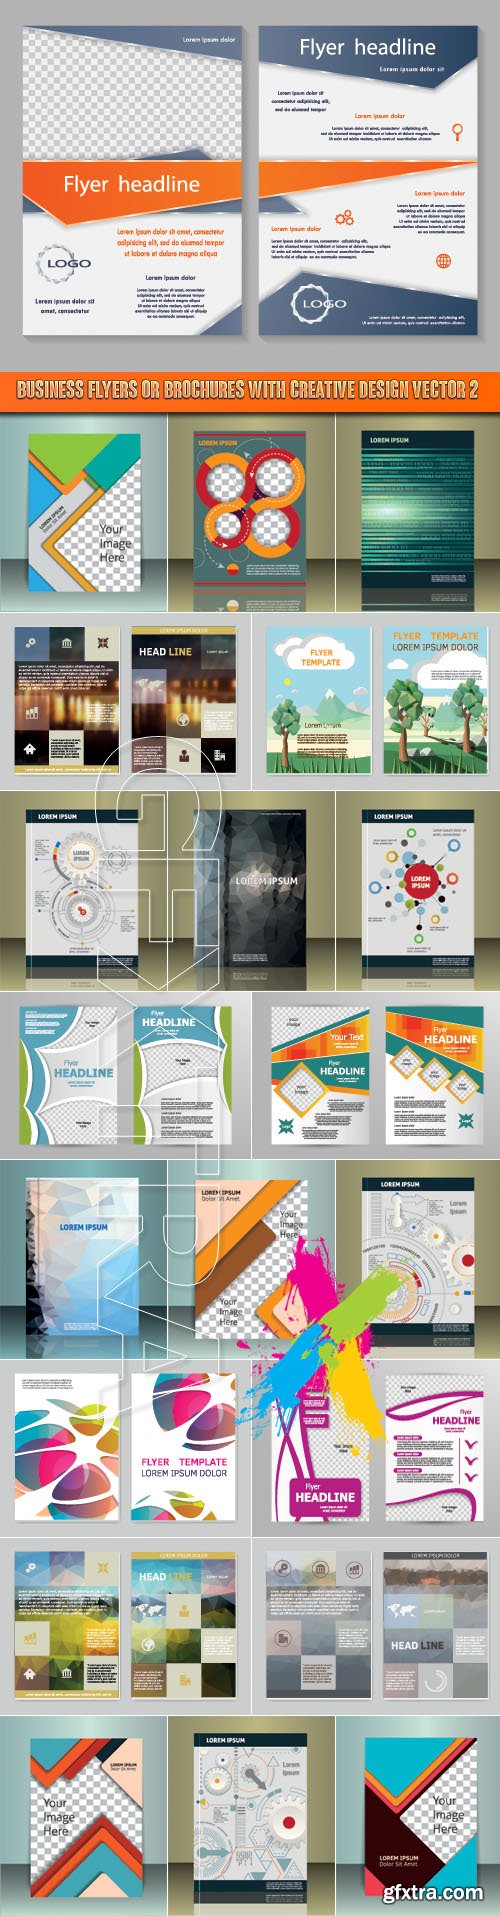 Business flyers or brochures with creative design vector 2